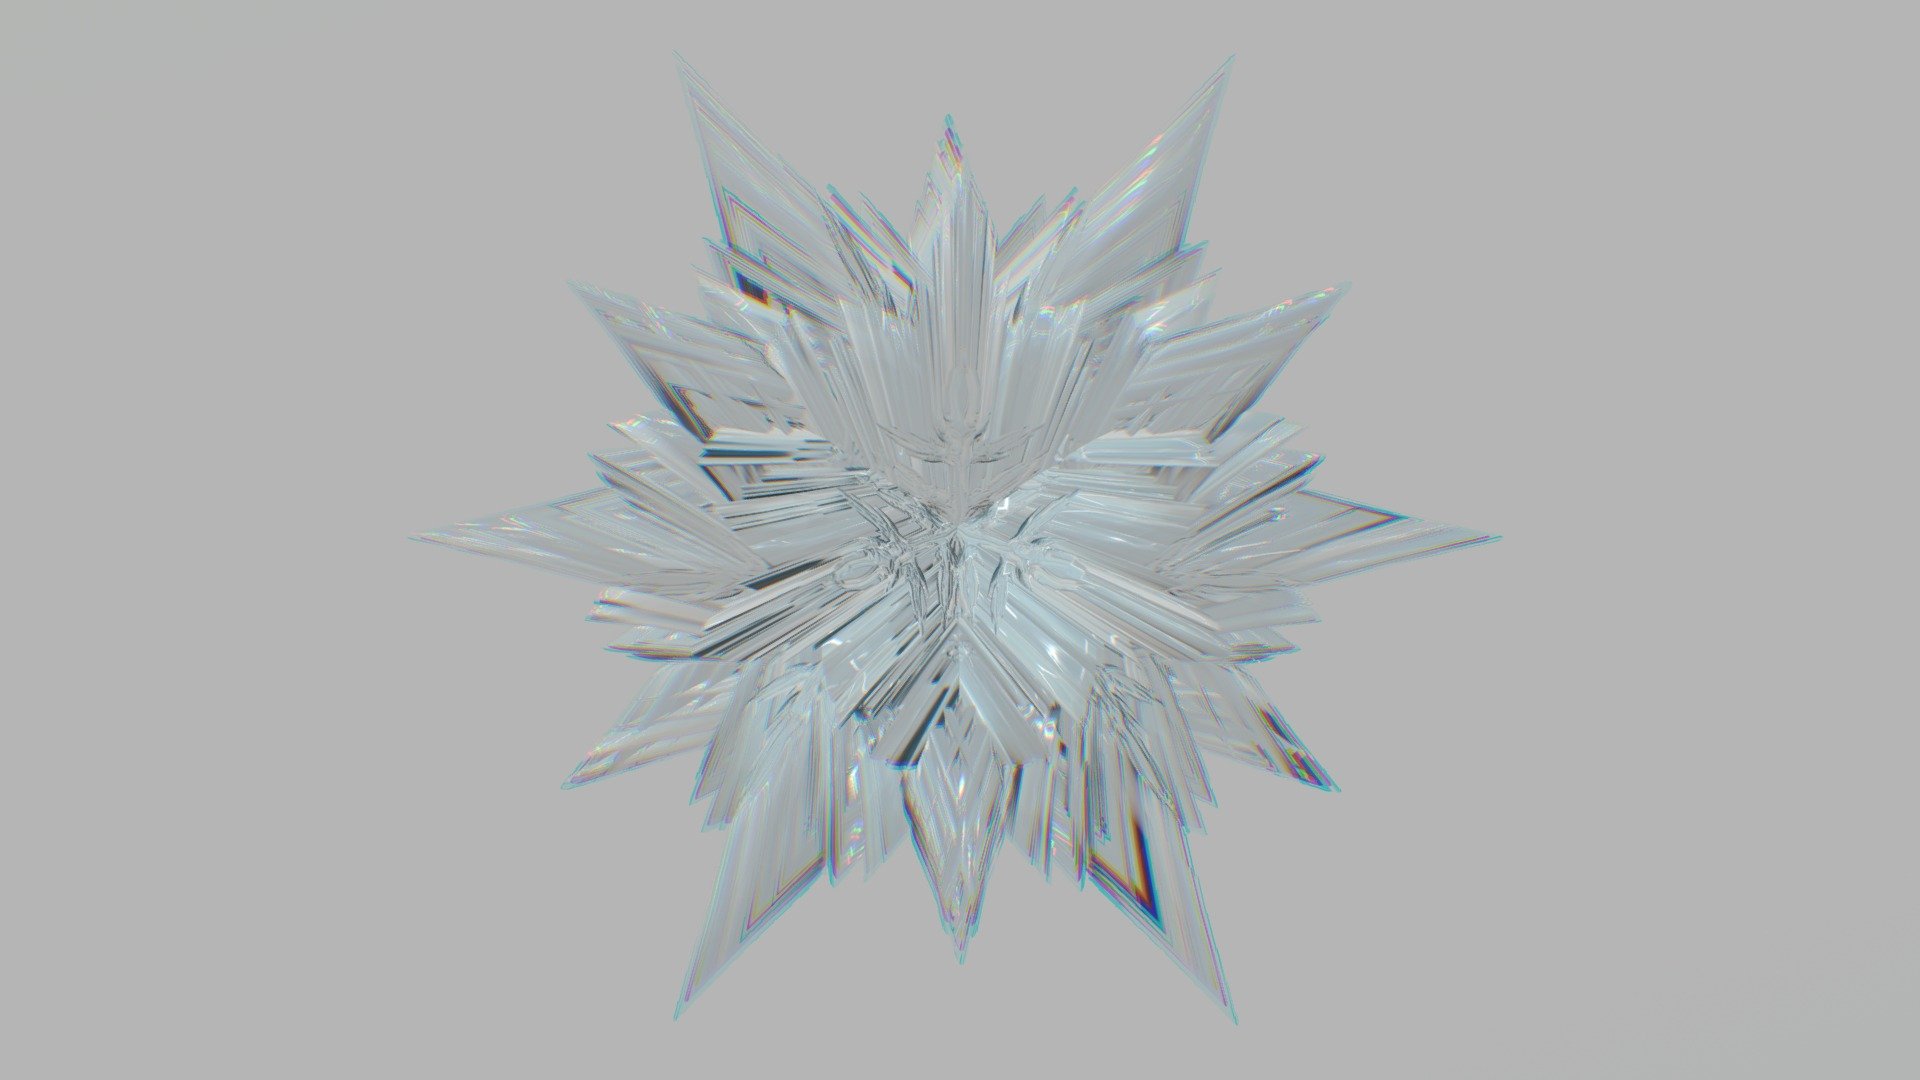 ice crystal images